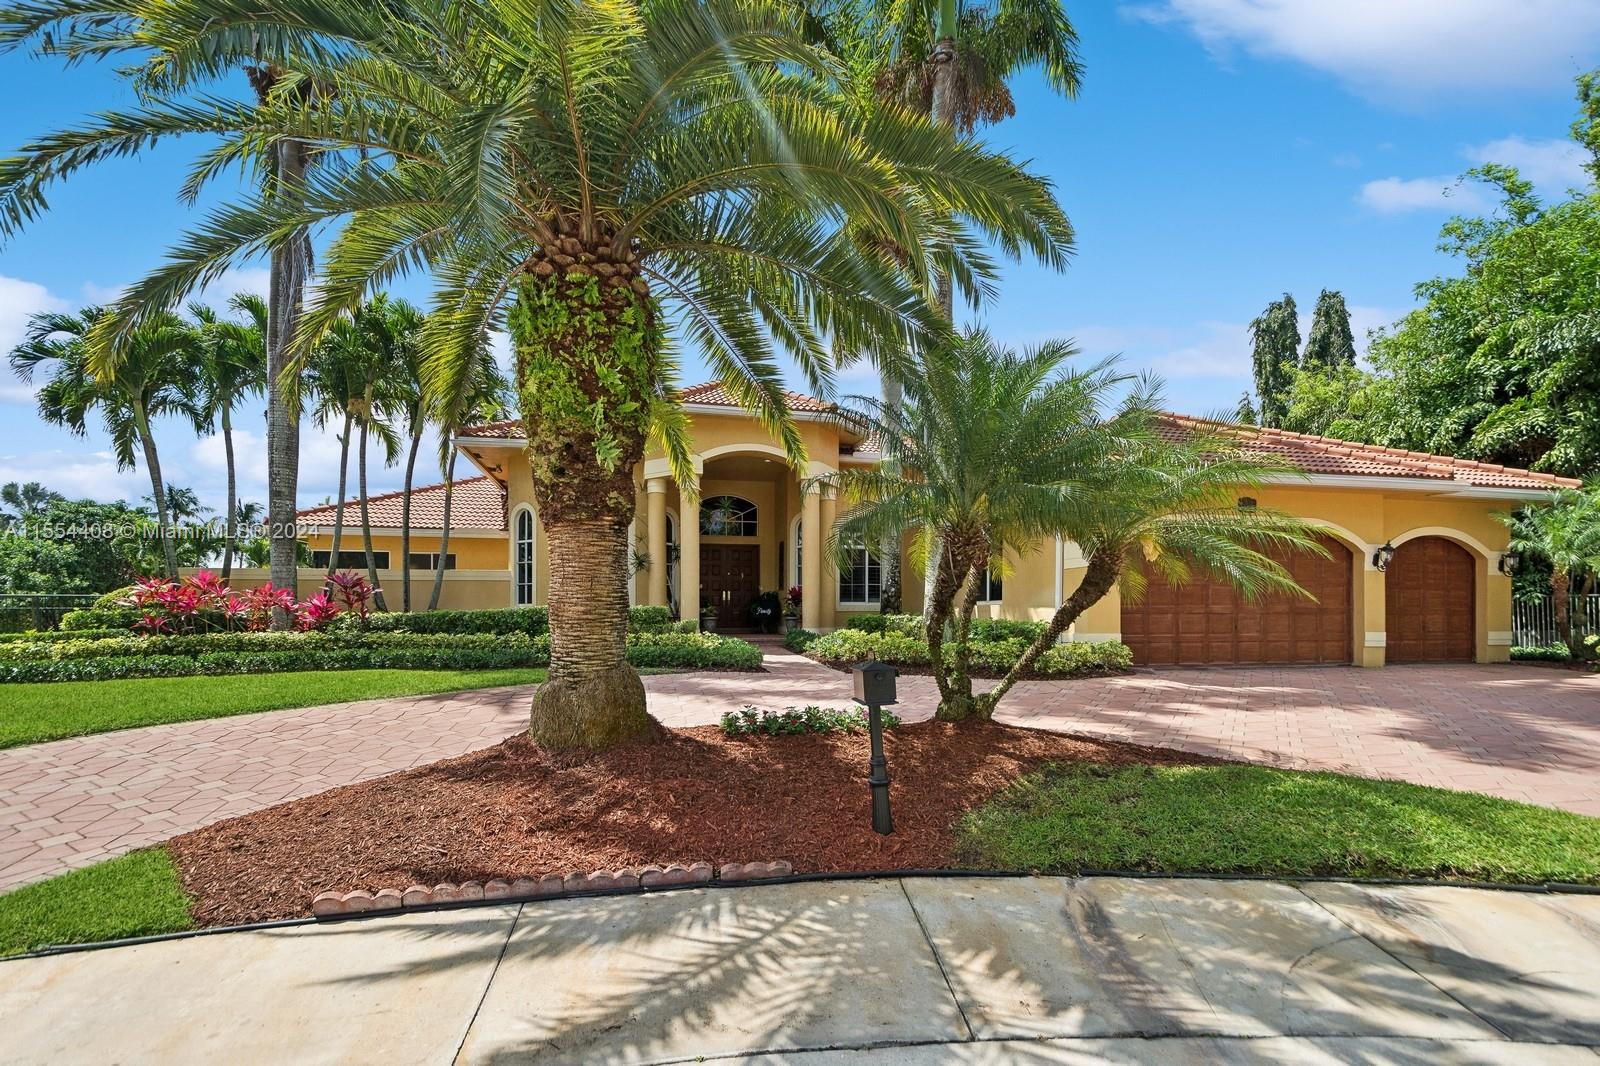 This exquisite home embraces a one-of-a-kind expansive ½ acre cul-de-sac lot, with scenic lake & golf views in the prestigious WHCC.The grand entrance has dramatic 20 ft. ceilings, LED lighting, and Sonos sound system throughout. This spectacular residence features a total of 5483 s.f. including 5 bdrms,5 baths, FR with solid mahogany wall unit, eat in kitchen & separate dining area, all with elegant marble and hw flooring. Spacious LVRM showcases a sunk in wet bar, the owner’s suite boasts his and hers private bthrms, sitting area, & large walk-in closets.The home extends its elegance outdoors with a spacious patio, heated pool, oversized spa, & large fully fenced grassed area for kids/pets! 3-car garage with a/c exercise room and new roof 2017.This exceptional property is a rare find!